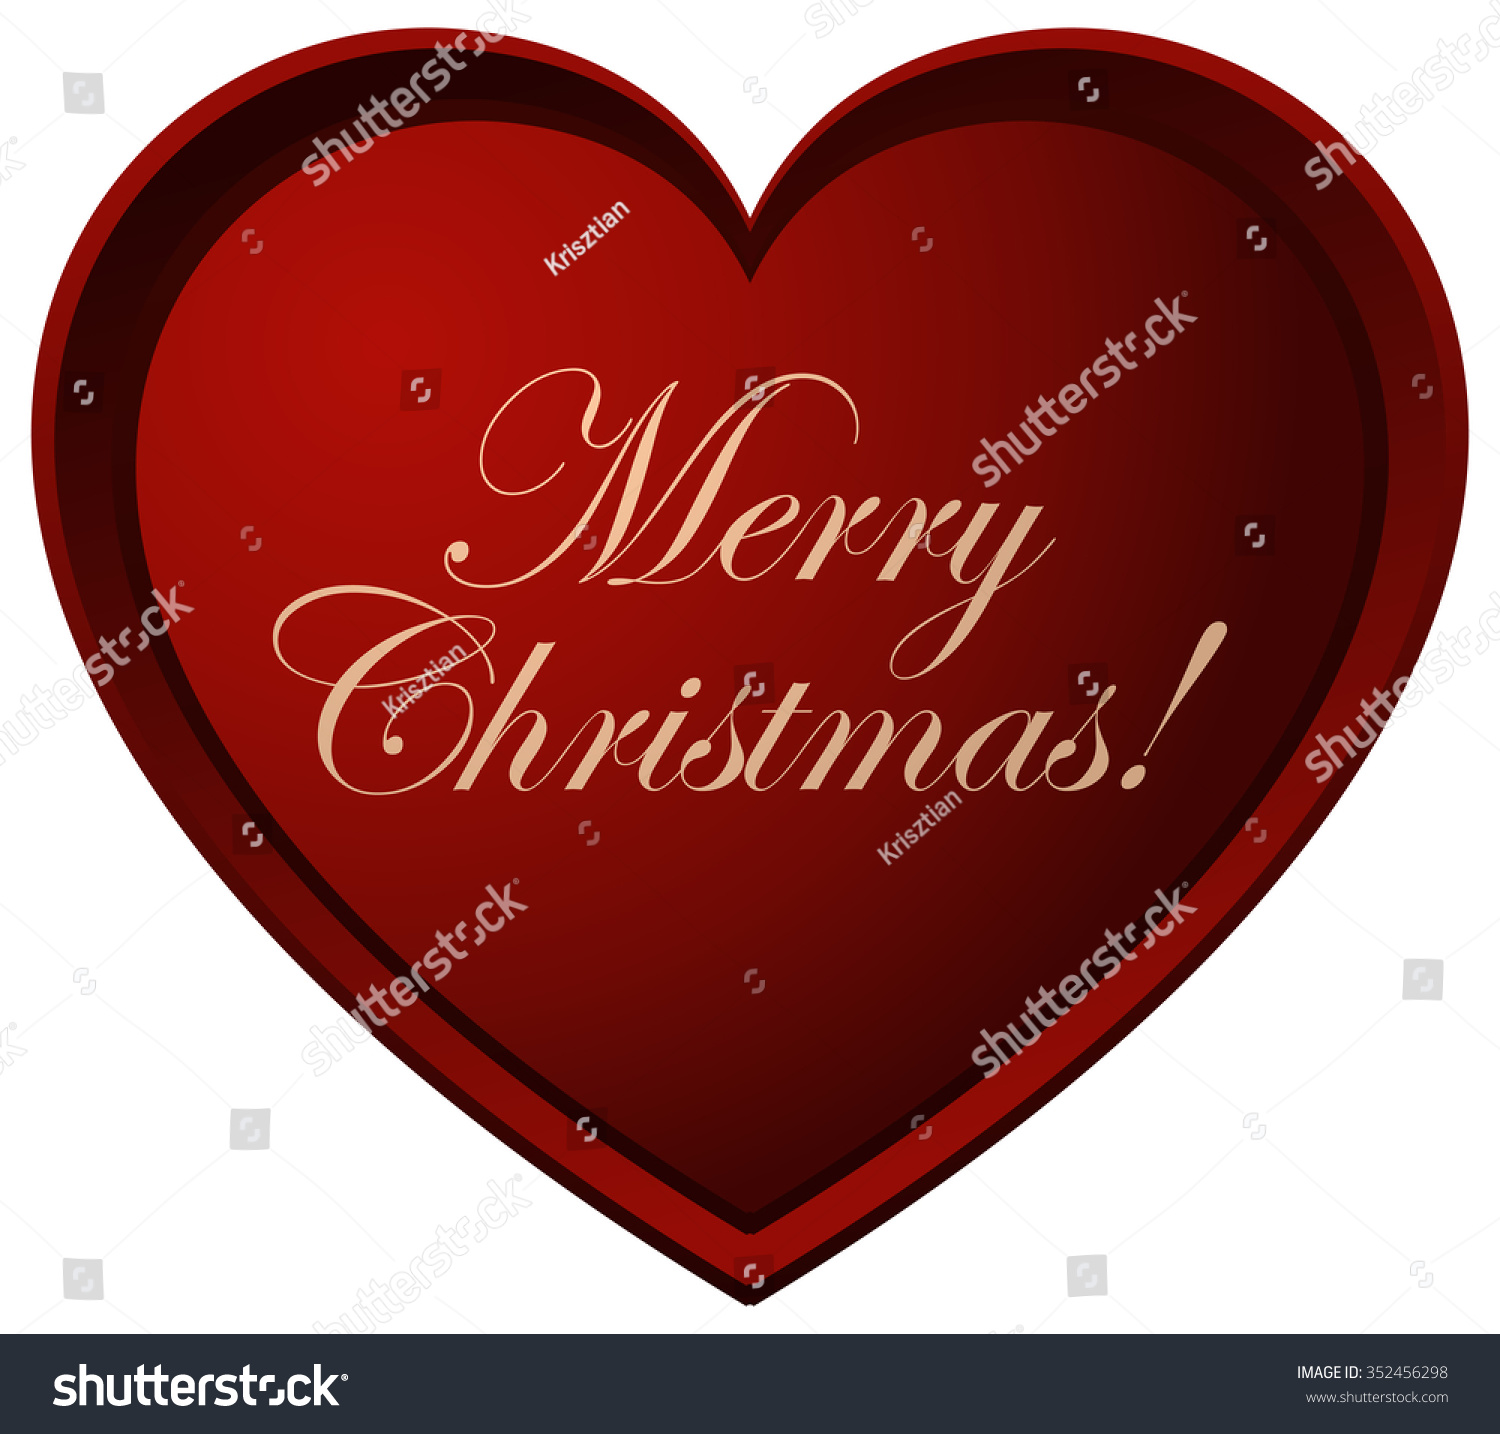 Merry Christmas Red Heart Vector Illustration Stock Vector (Royalty Free) 352456298